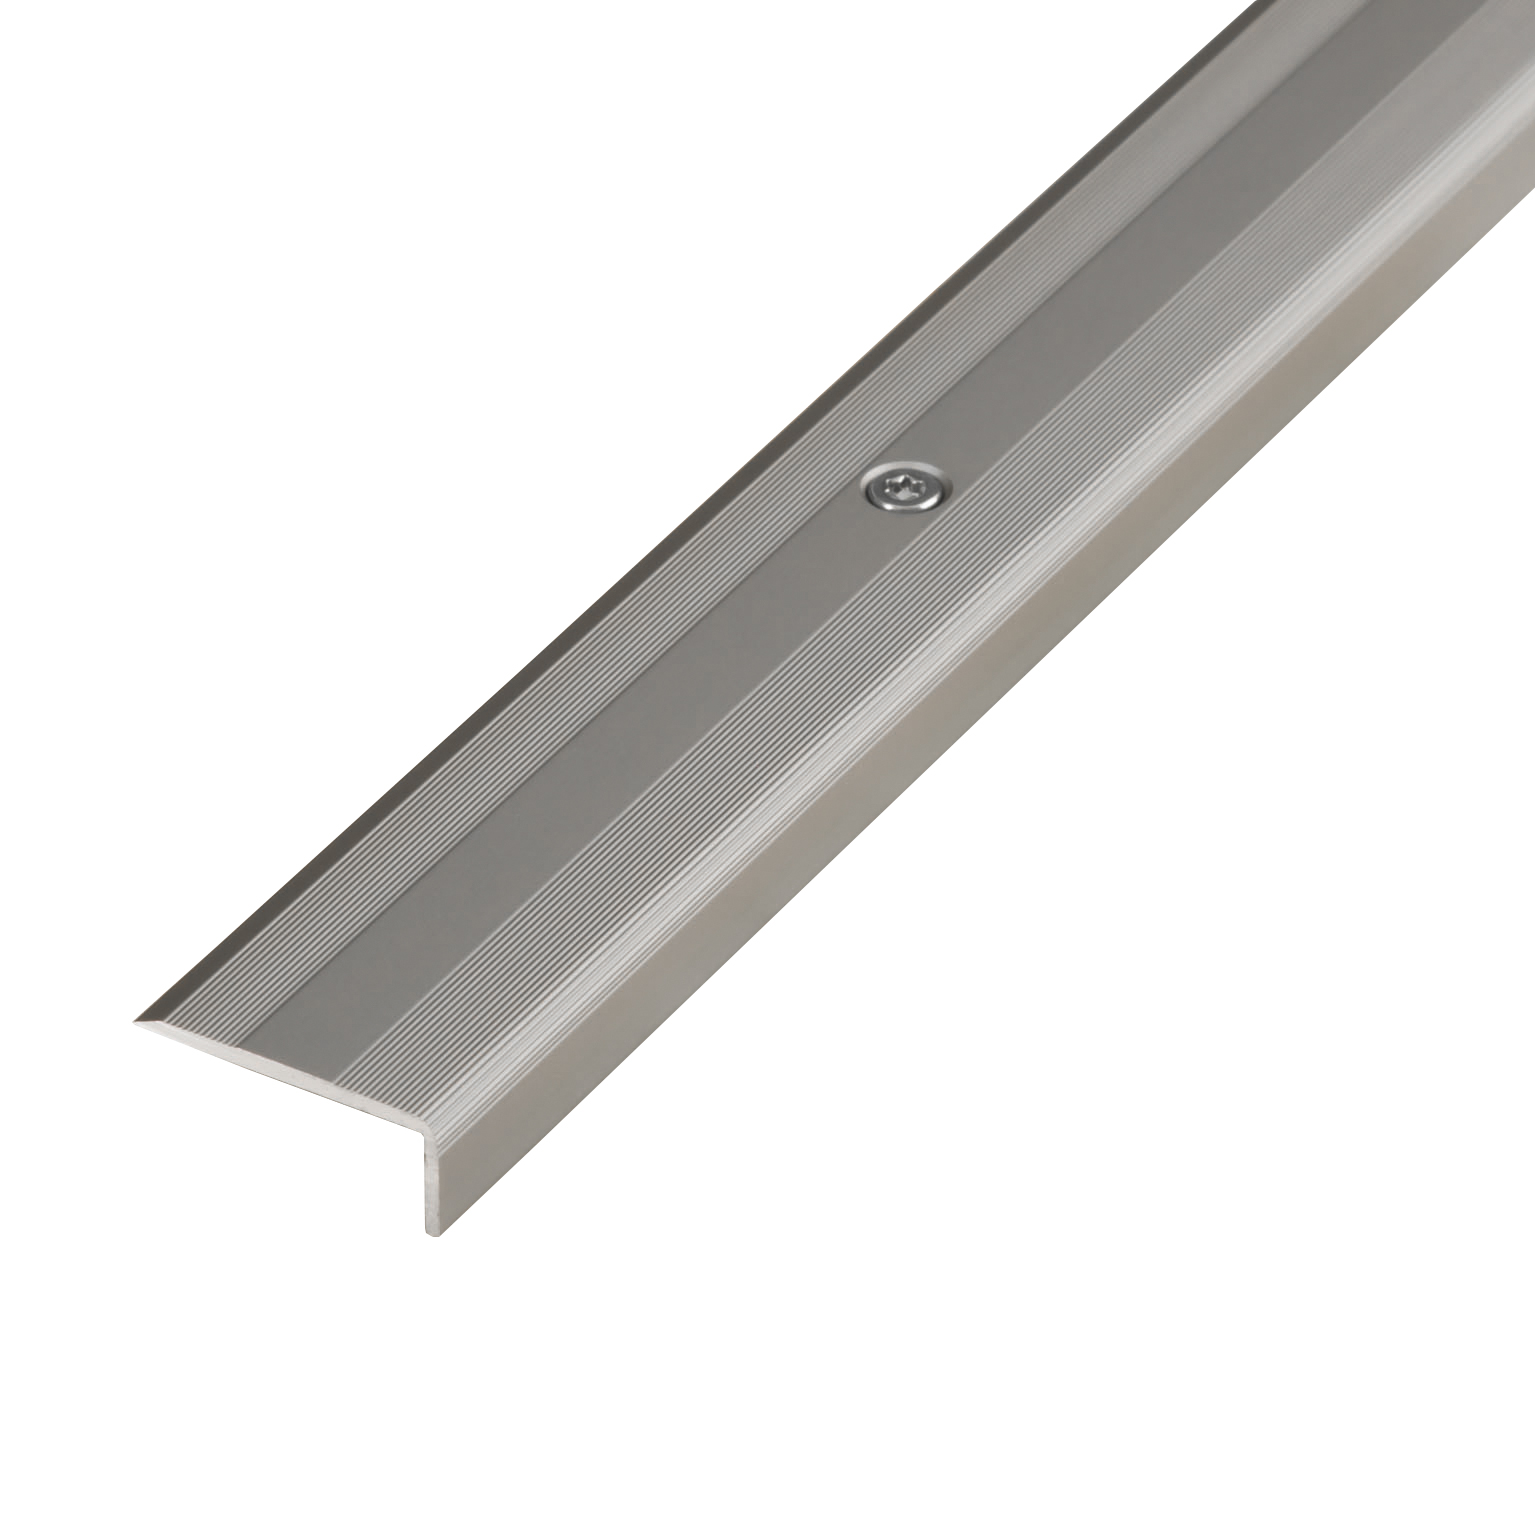 Angle profile perfor. alu stainl. steel